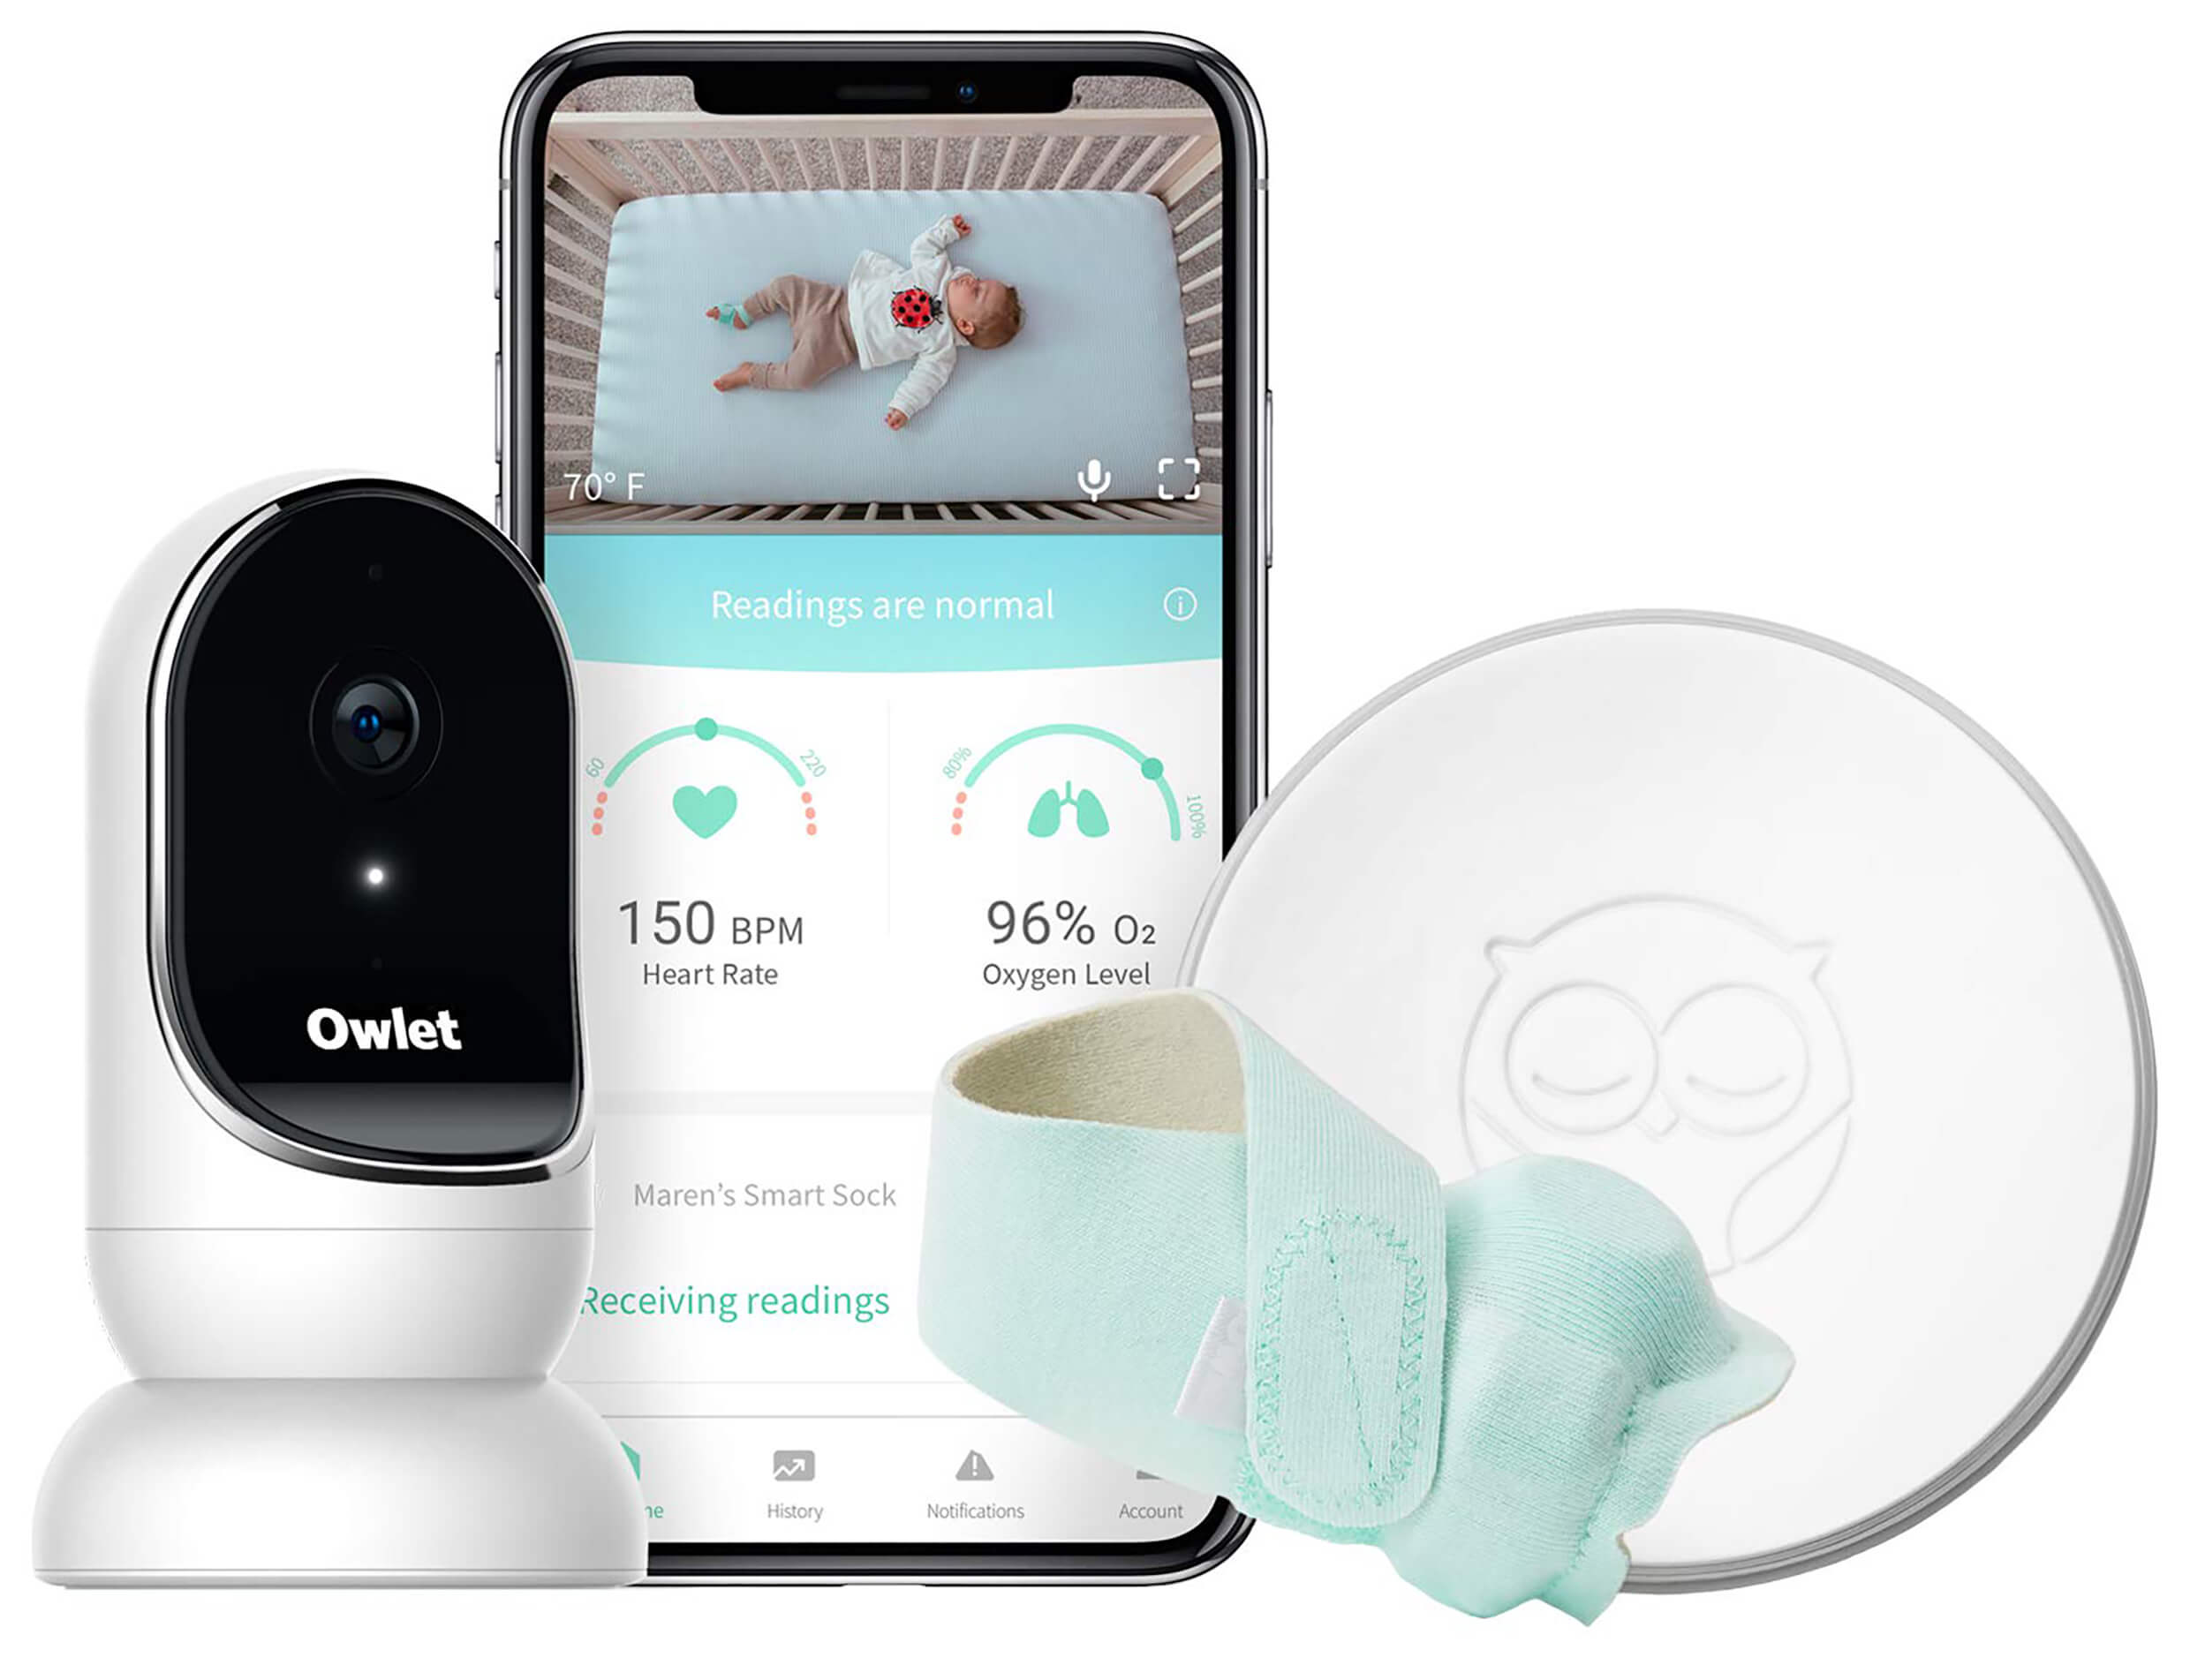 Owlet specializes in pediatric monitoring